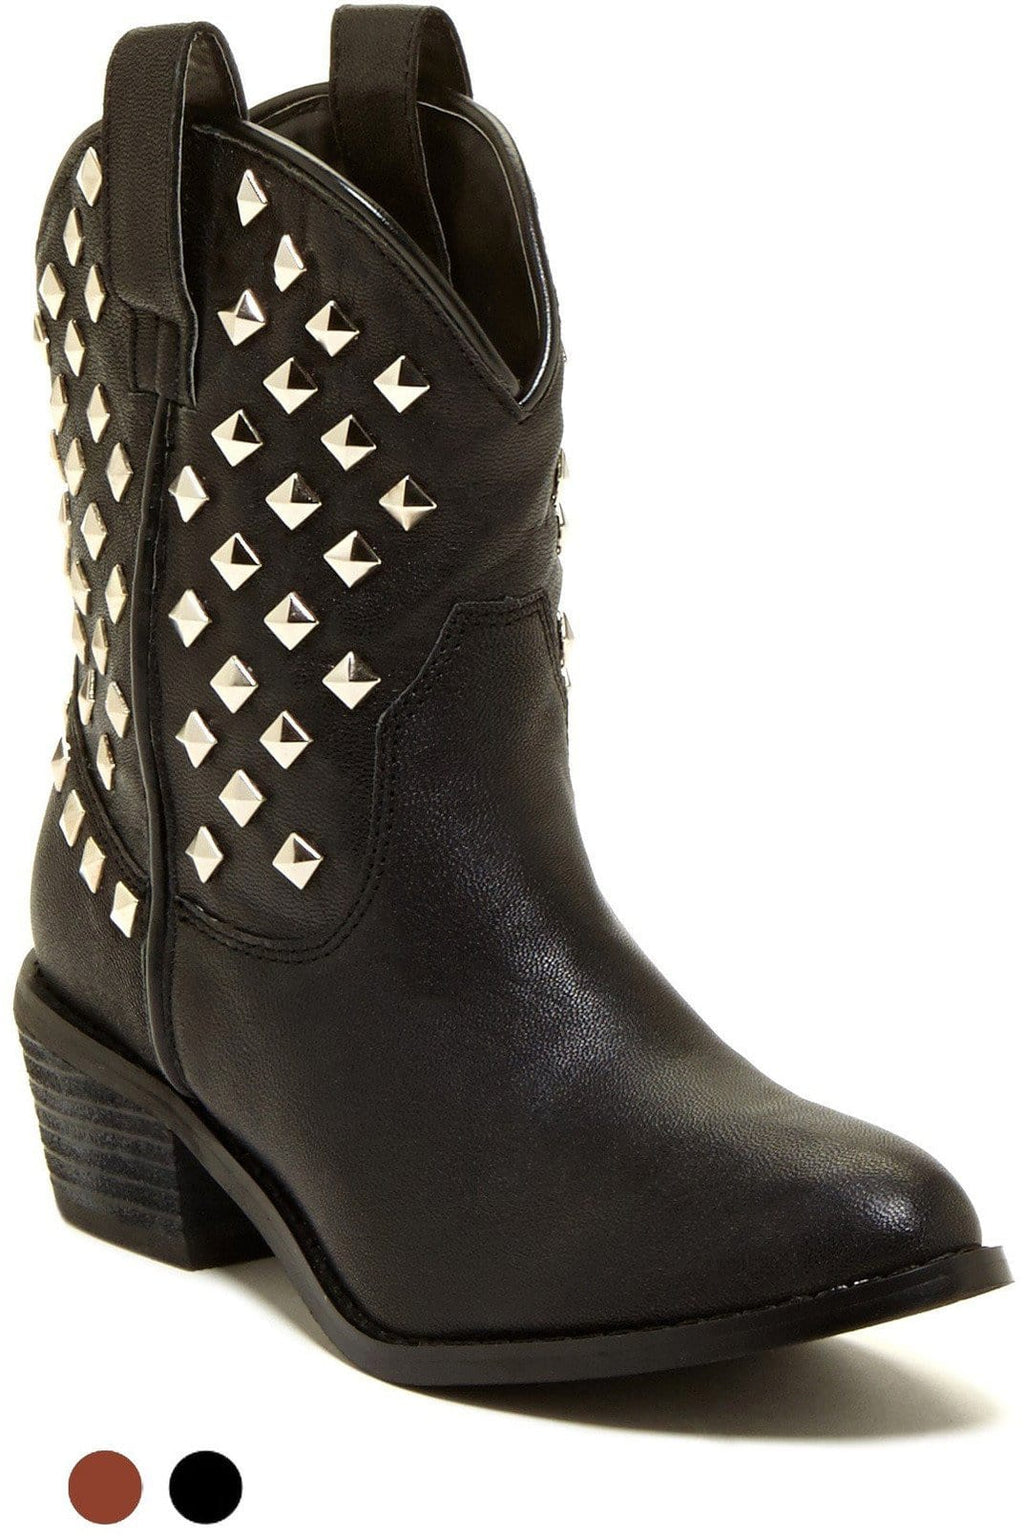 N.Y.L.A. SHOES BOOTIES 6 / BLACK N.Y.L.A. Shoes Frankie Women's Western Studded Boots in Black or Tan